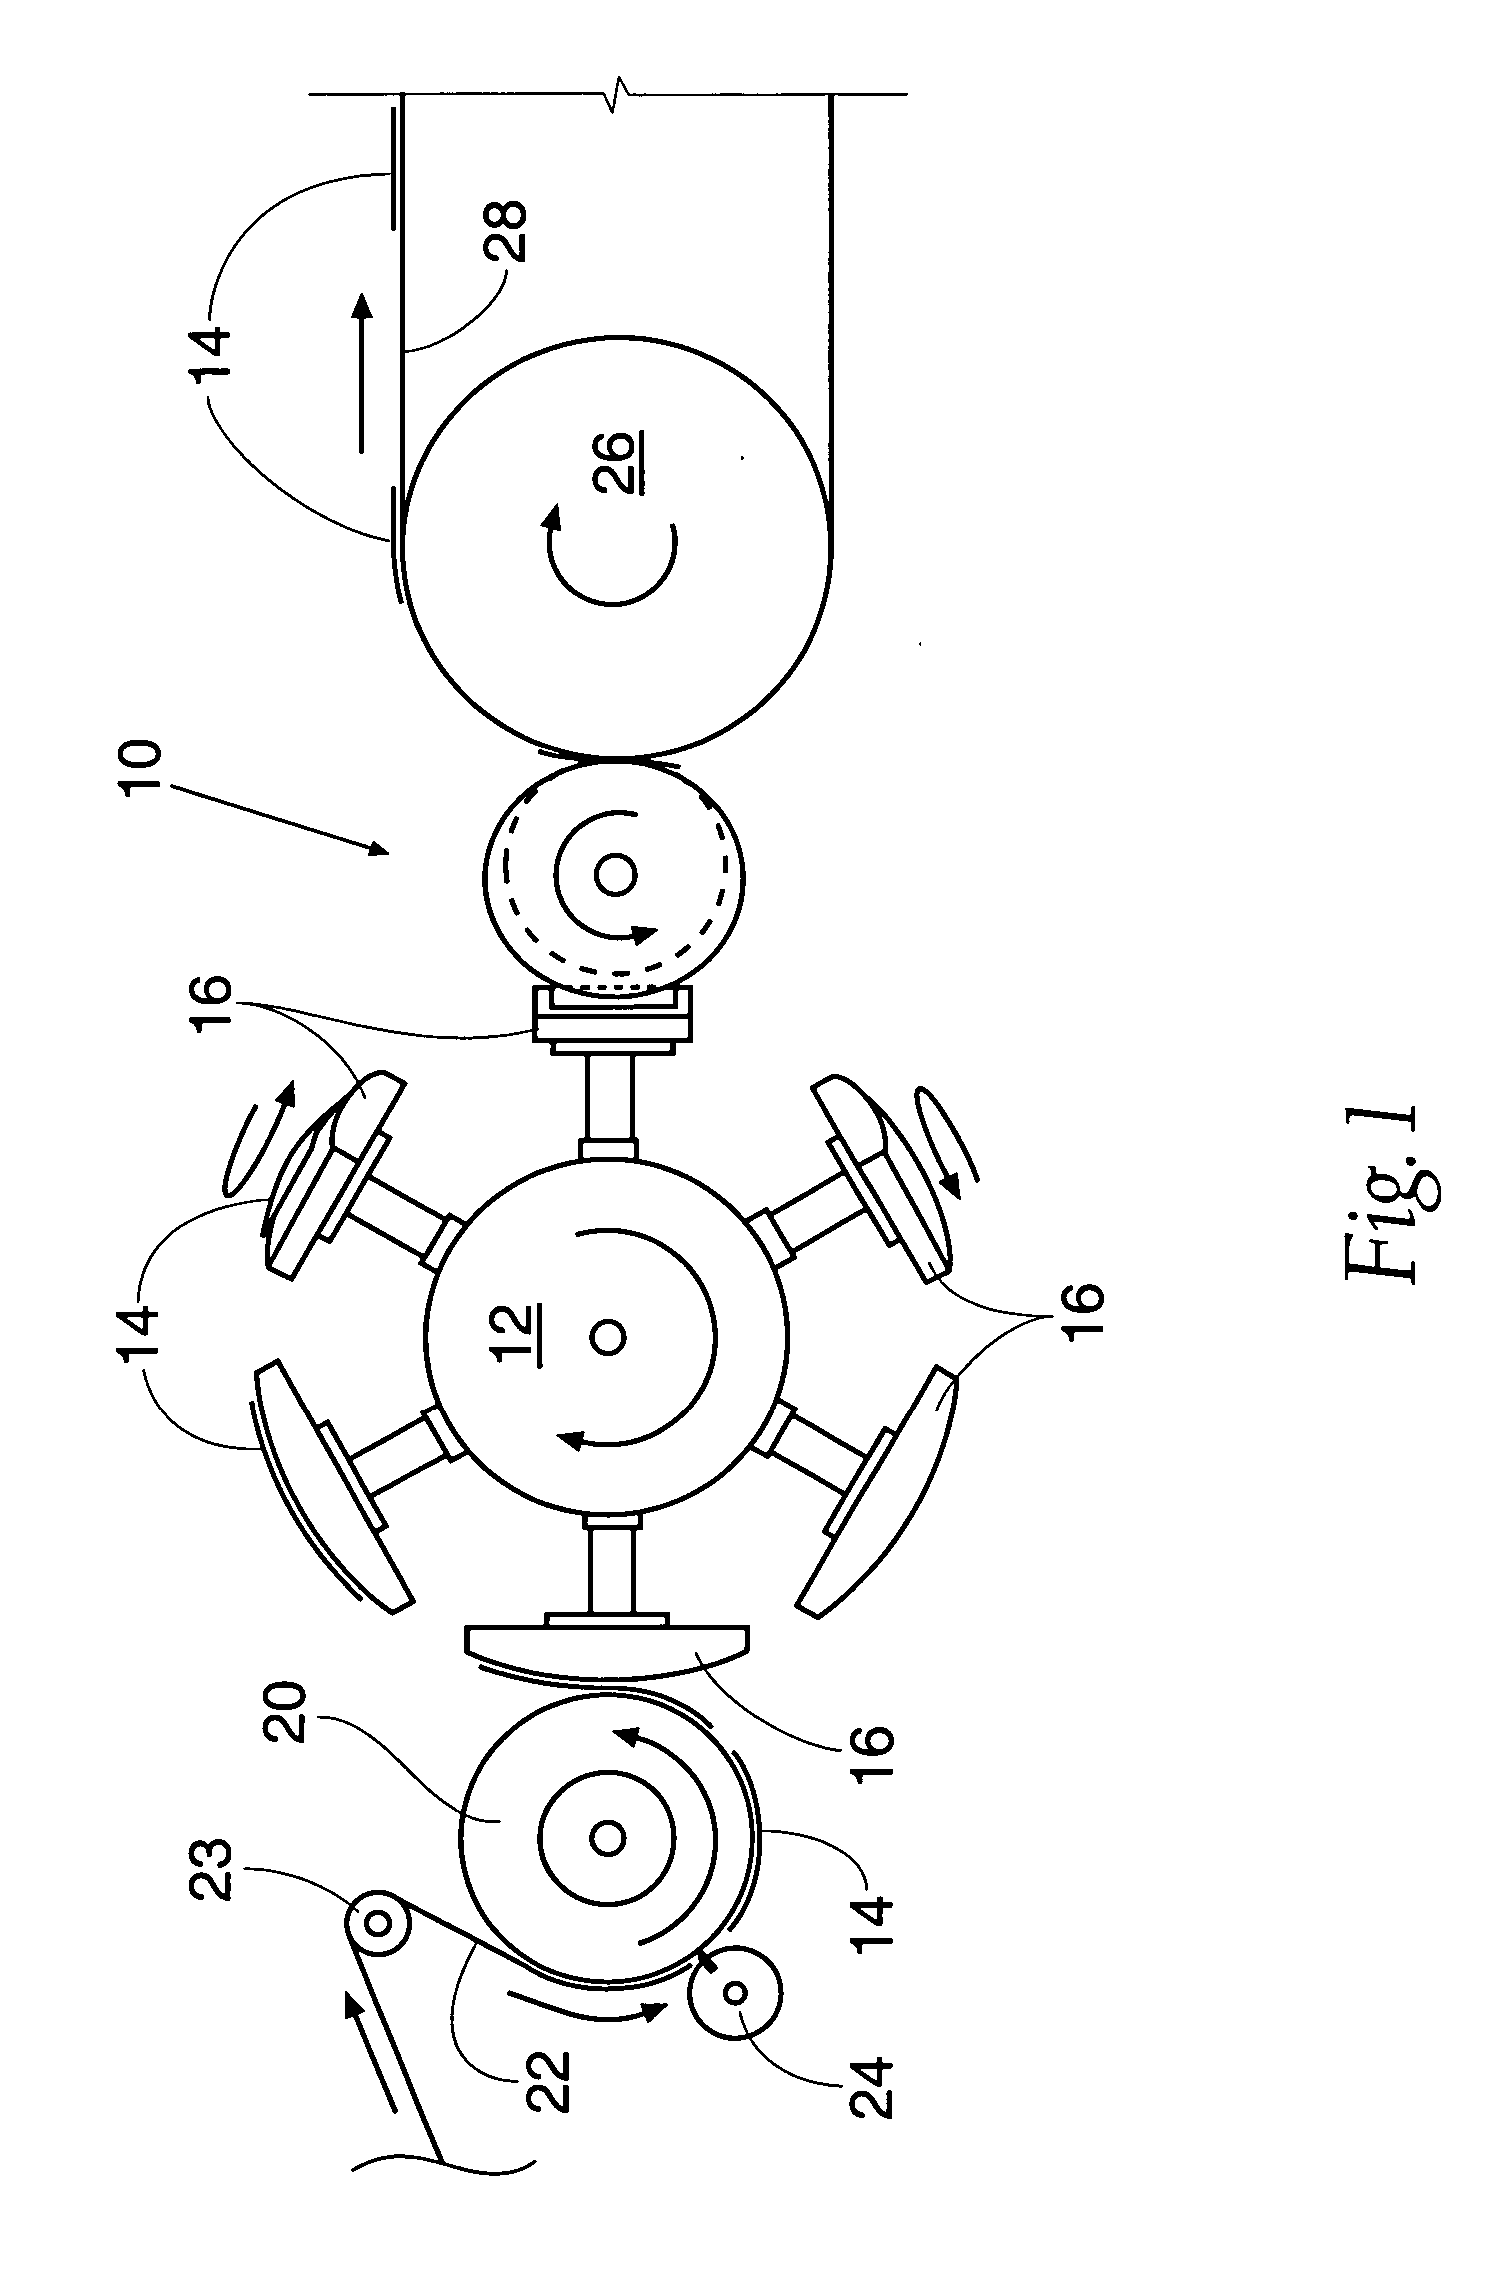 Article transfer and placement apparatus